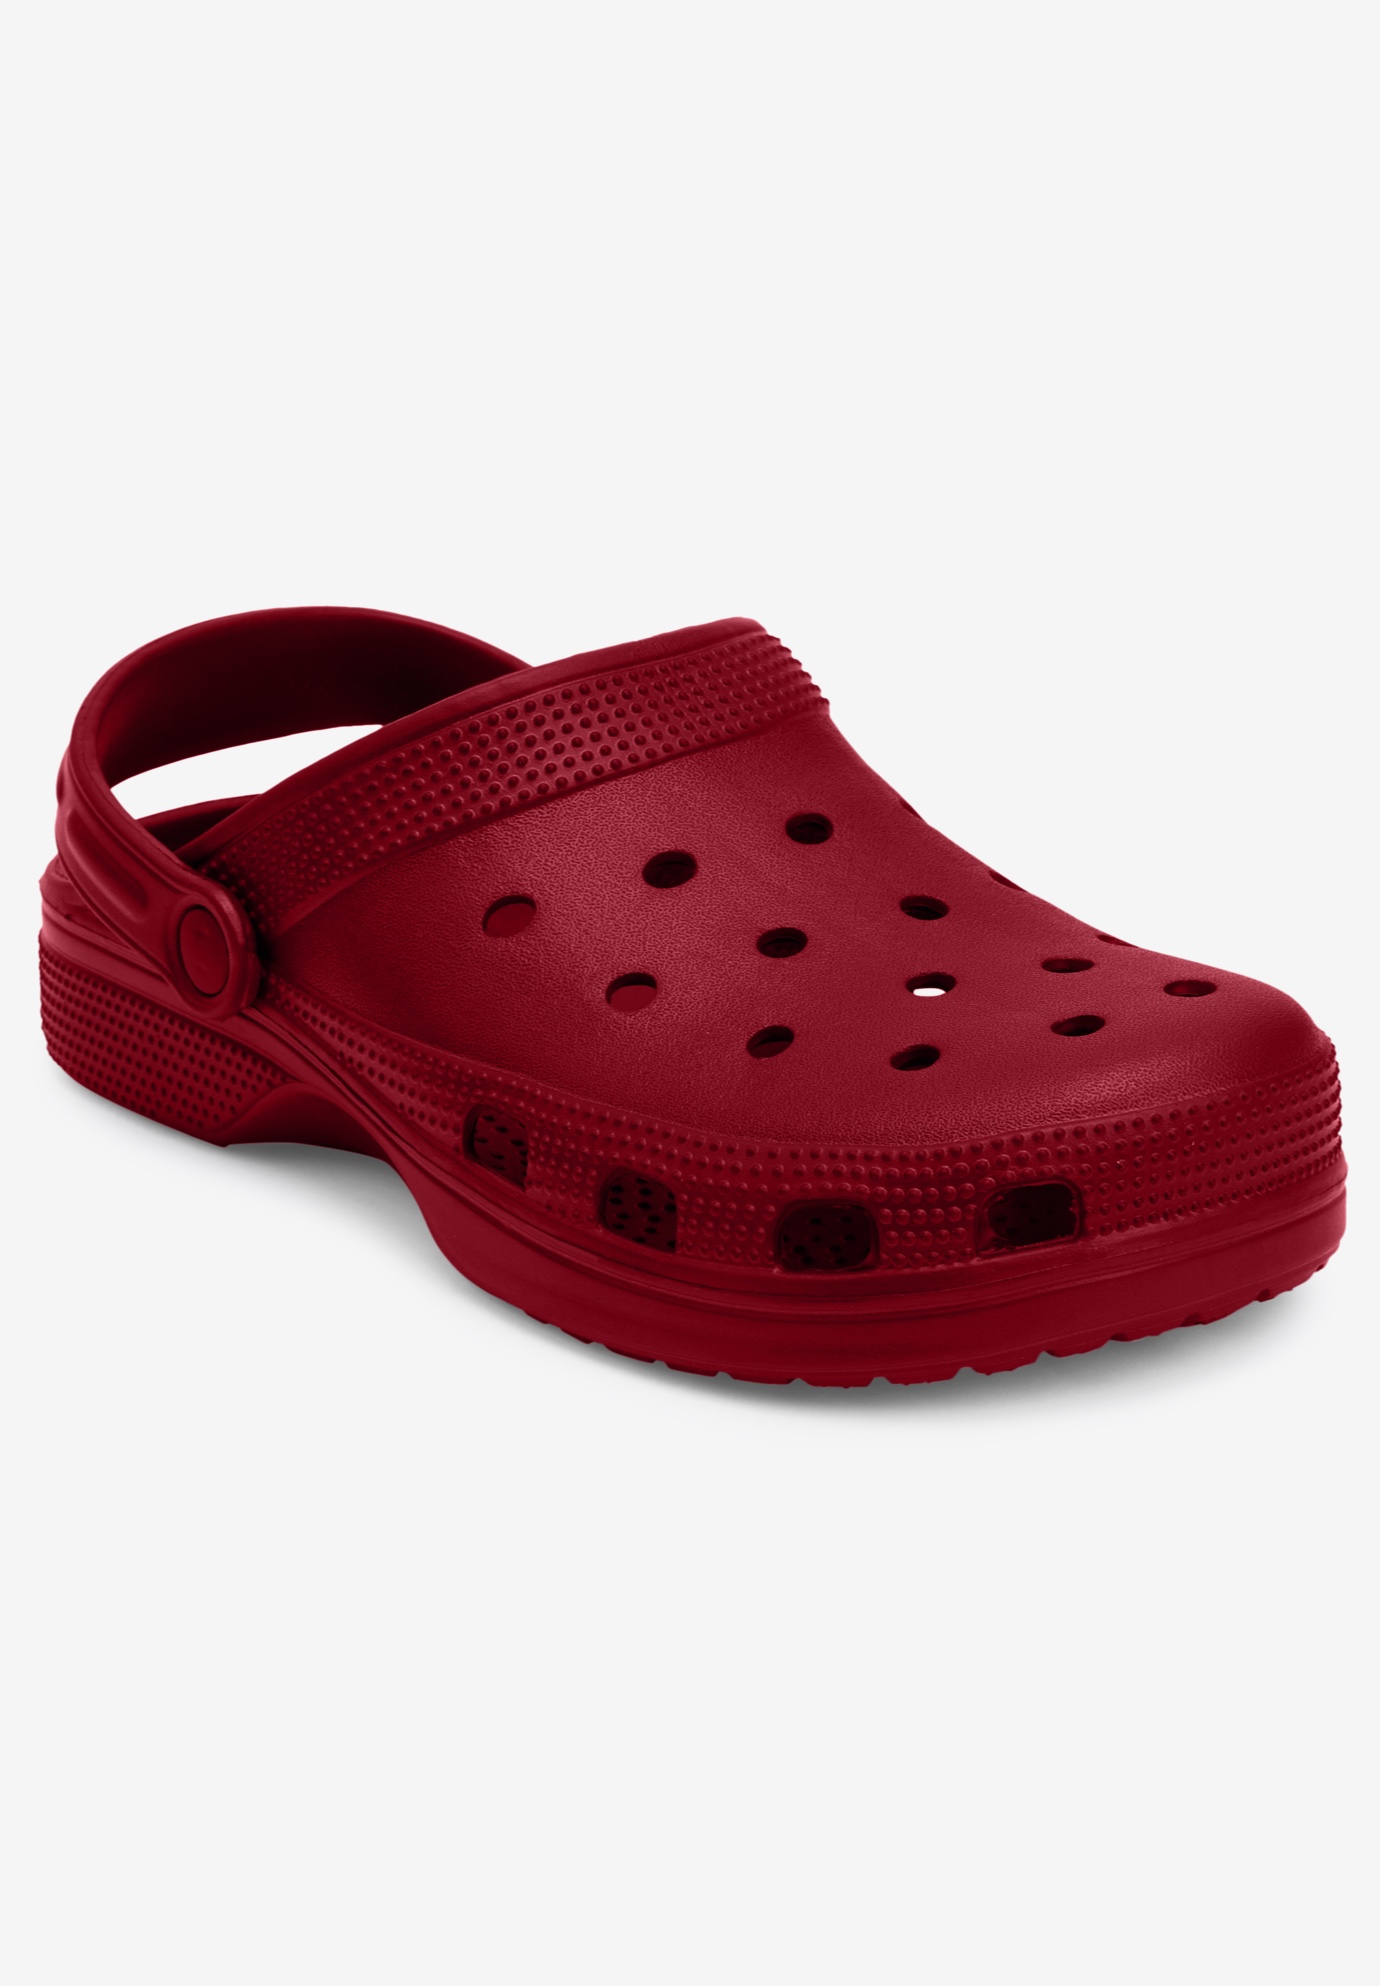 rubber clogs with holes